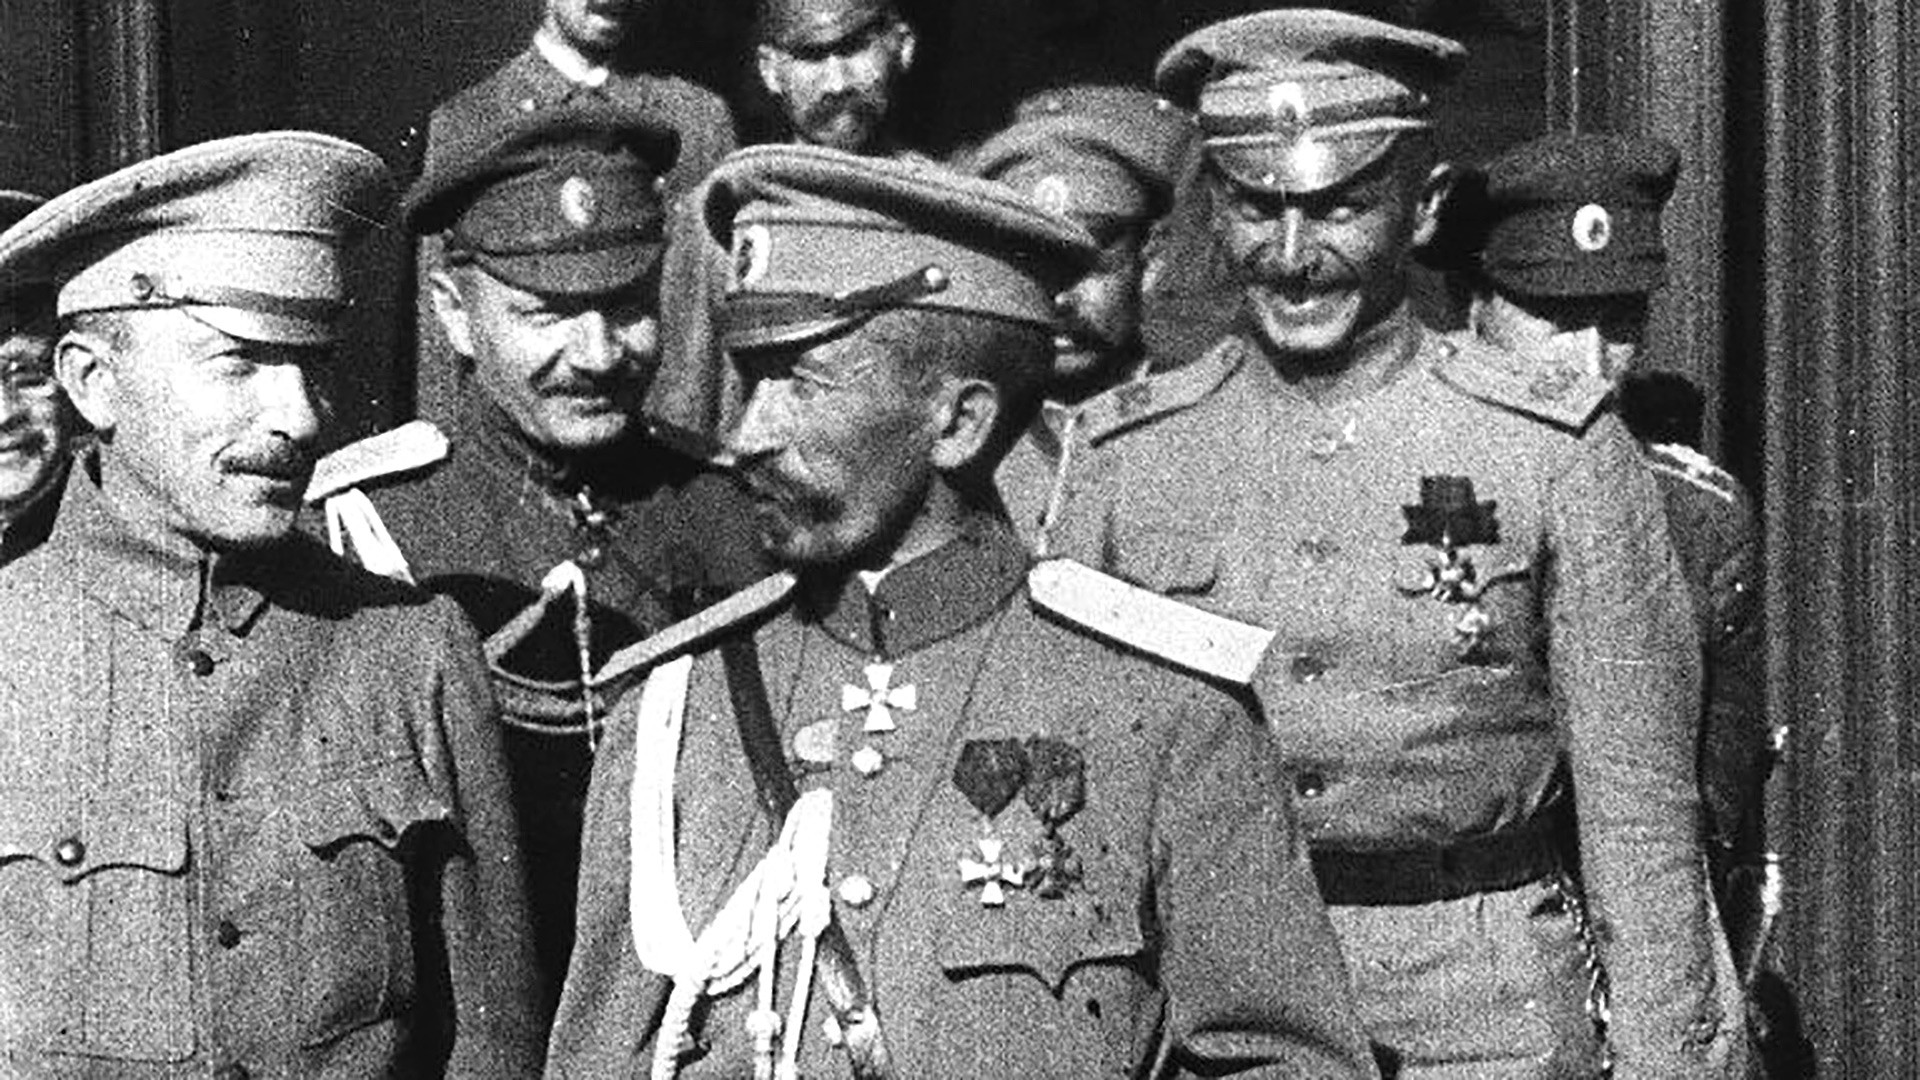 The Commander-in-Chief General Kornilov sent troops to Petrograd to challenge the Provisional Government in August 1917